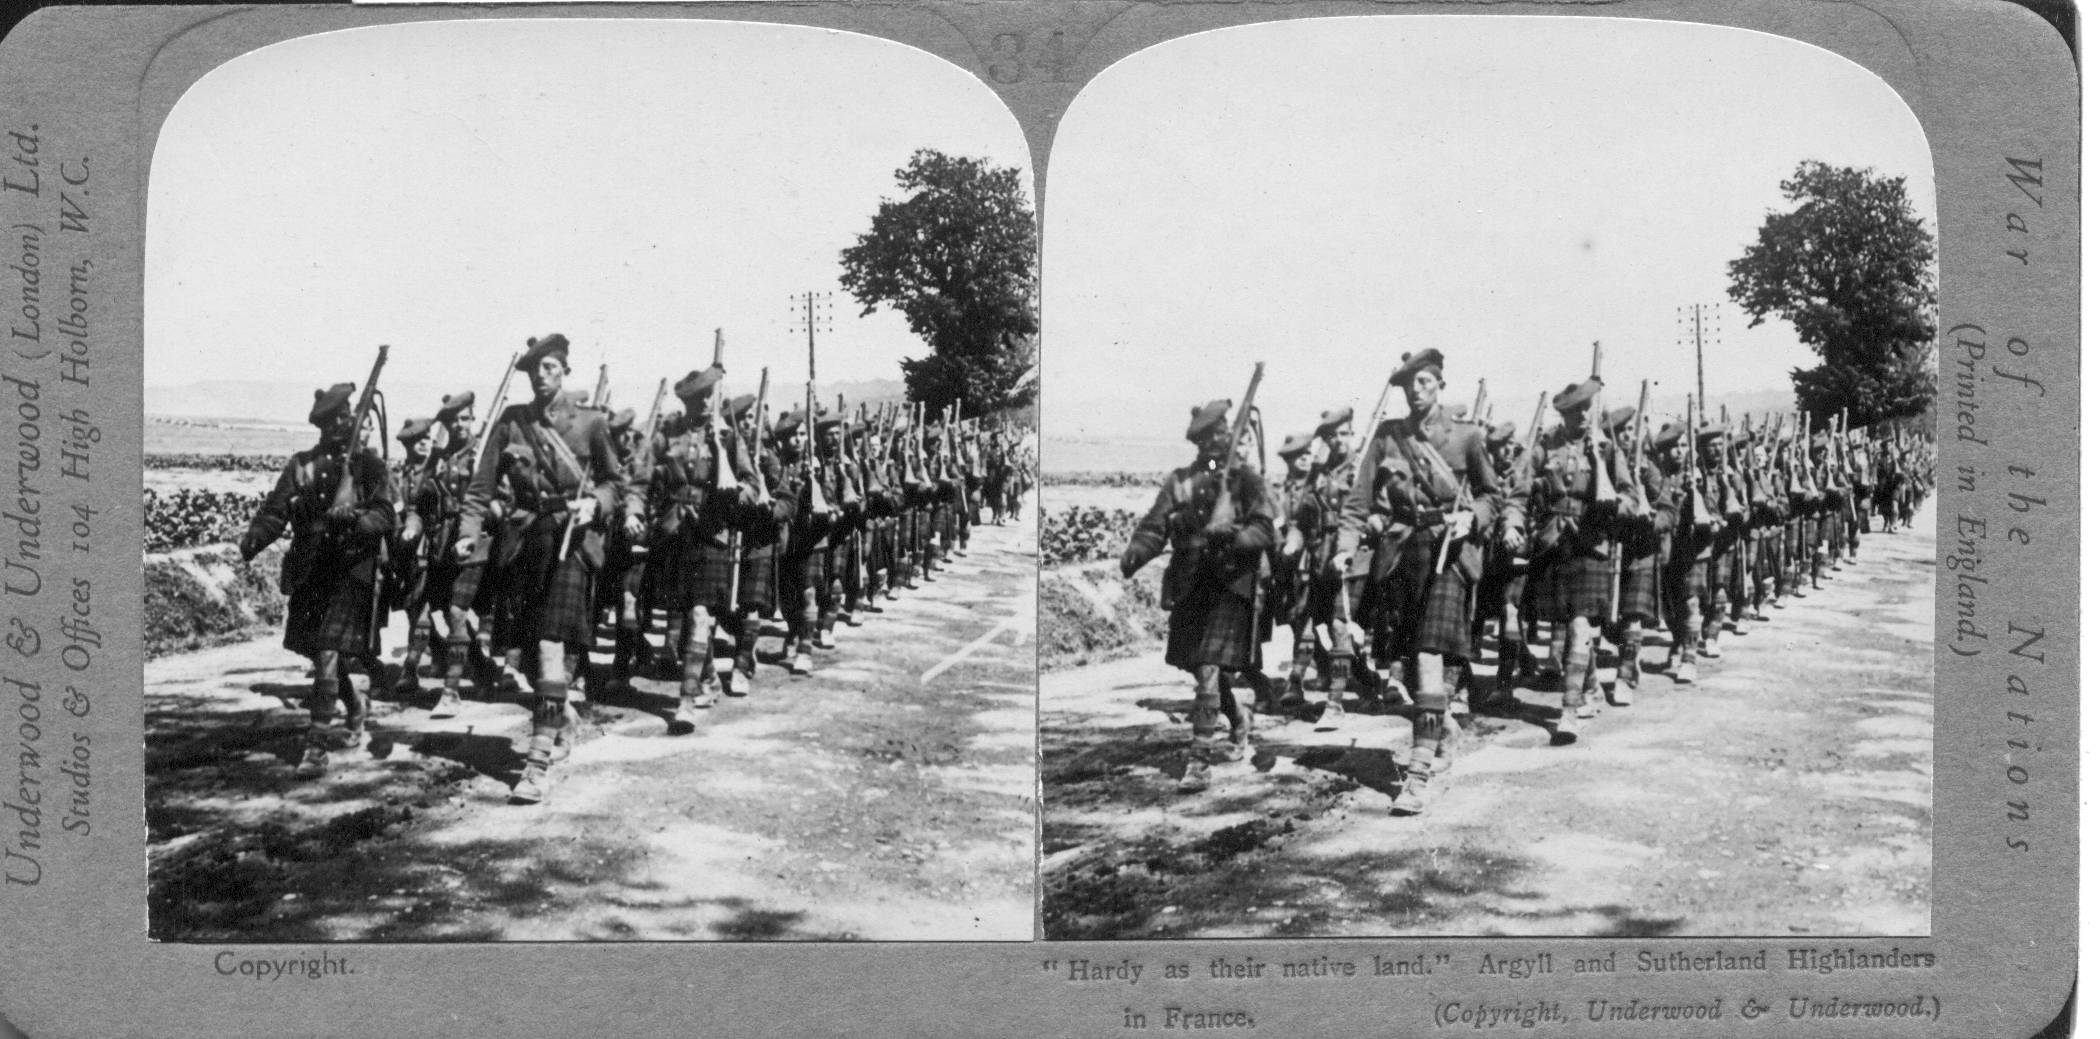 "Hardy as their native land." Argyll and Sutherland Highlanders In France